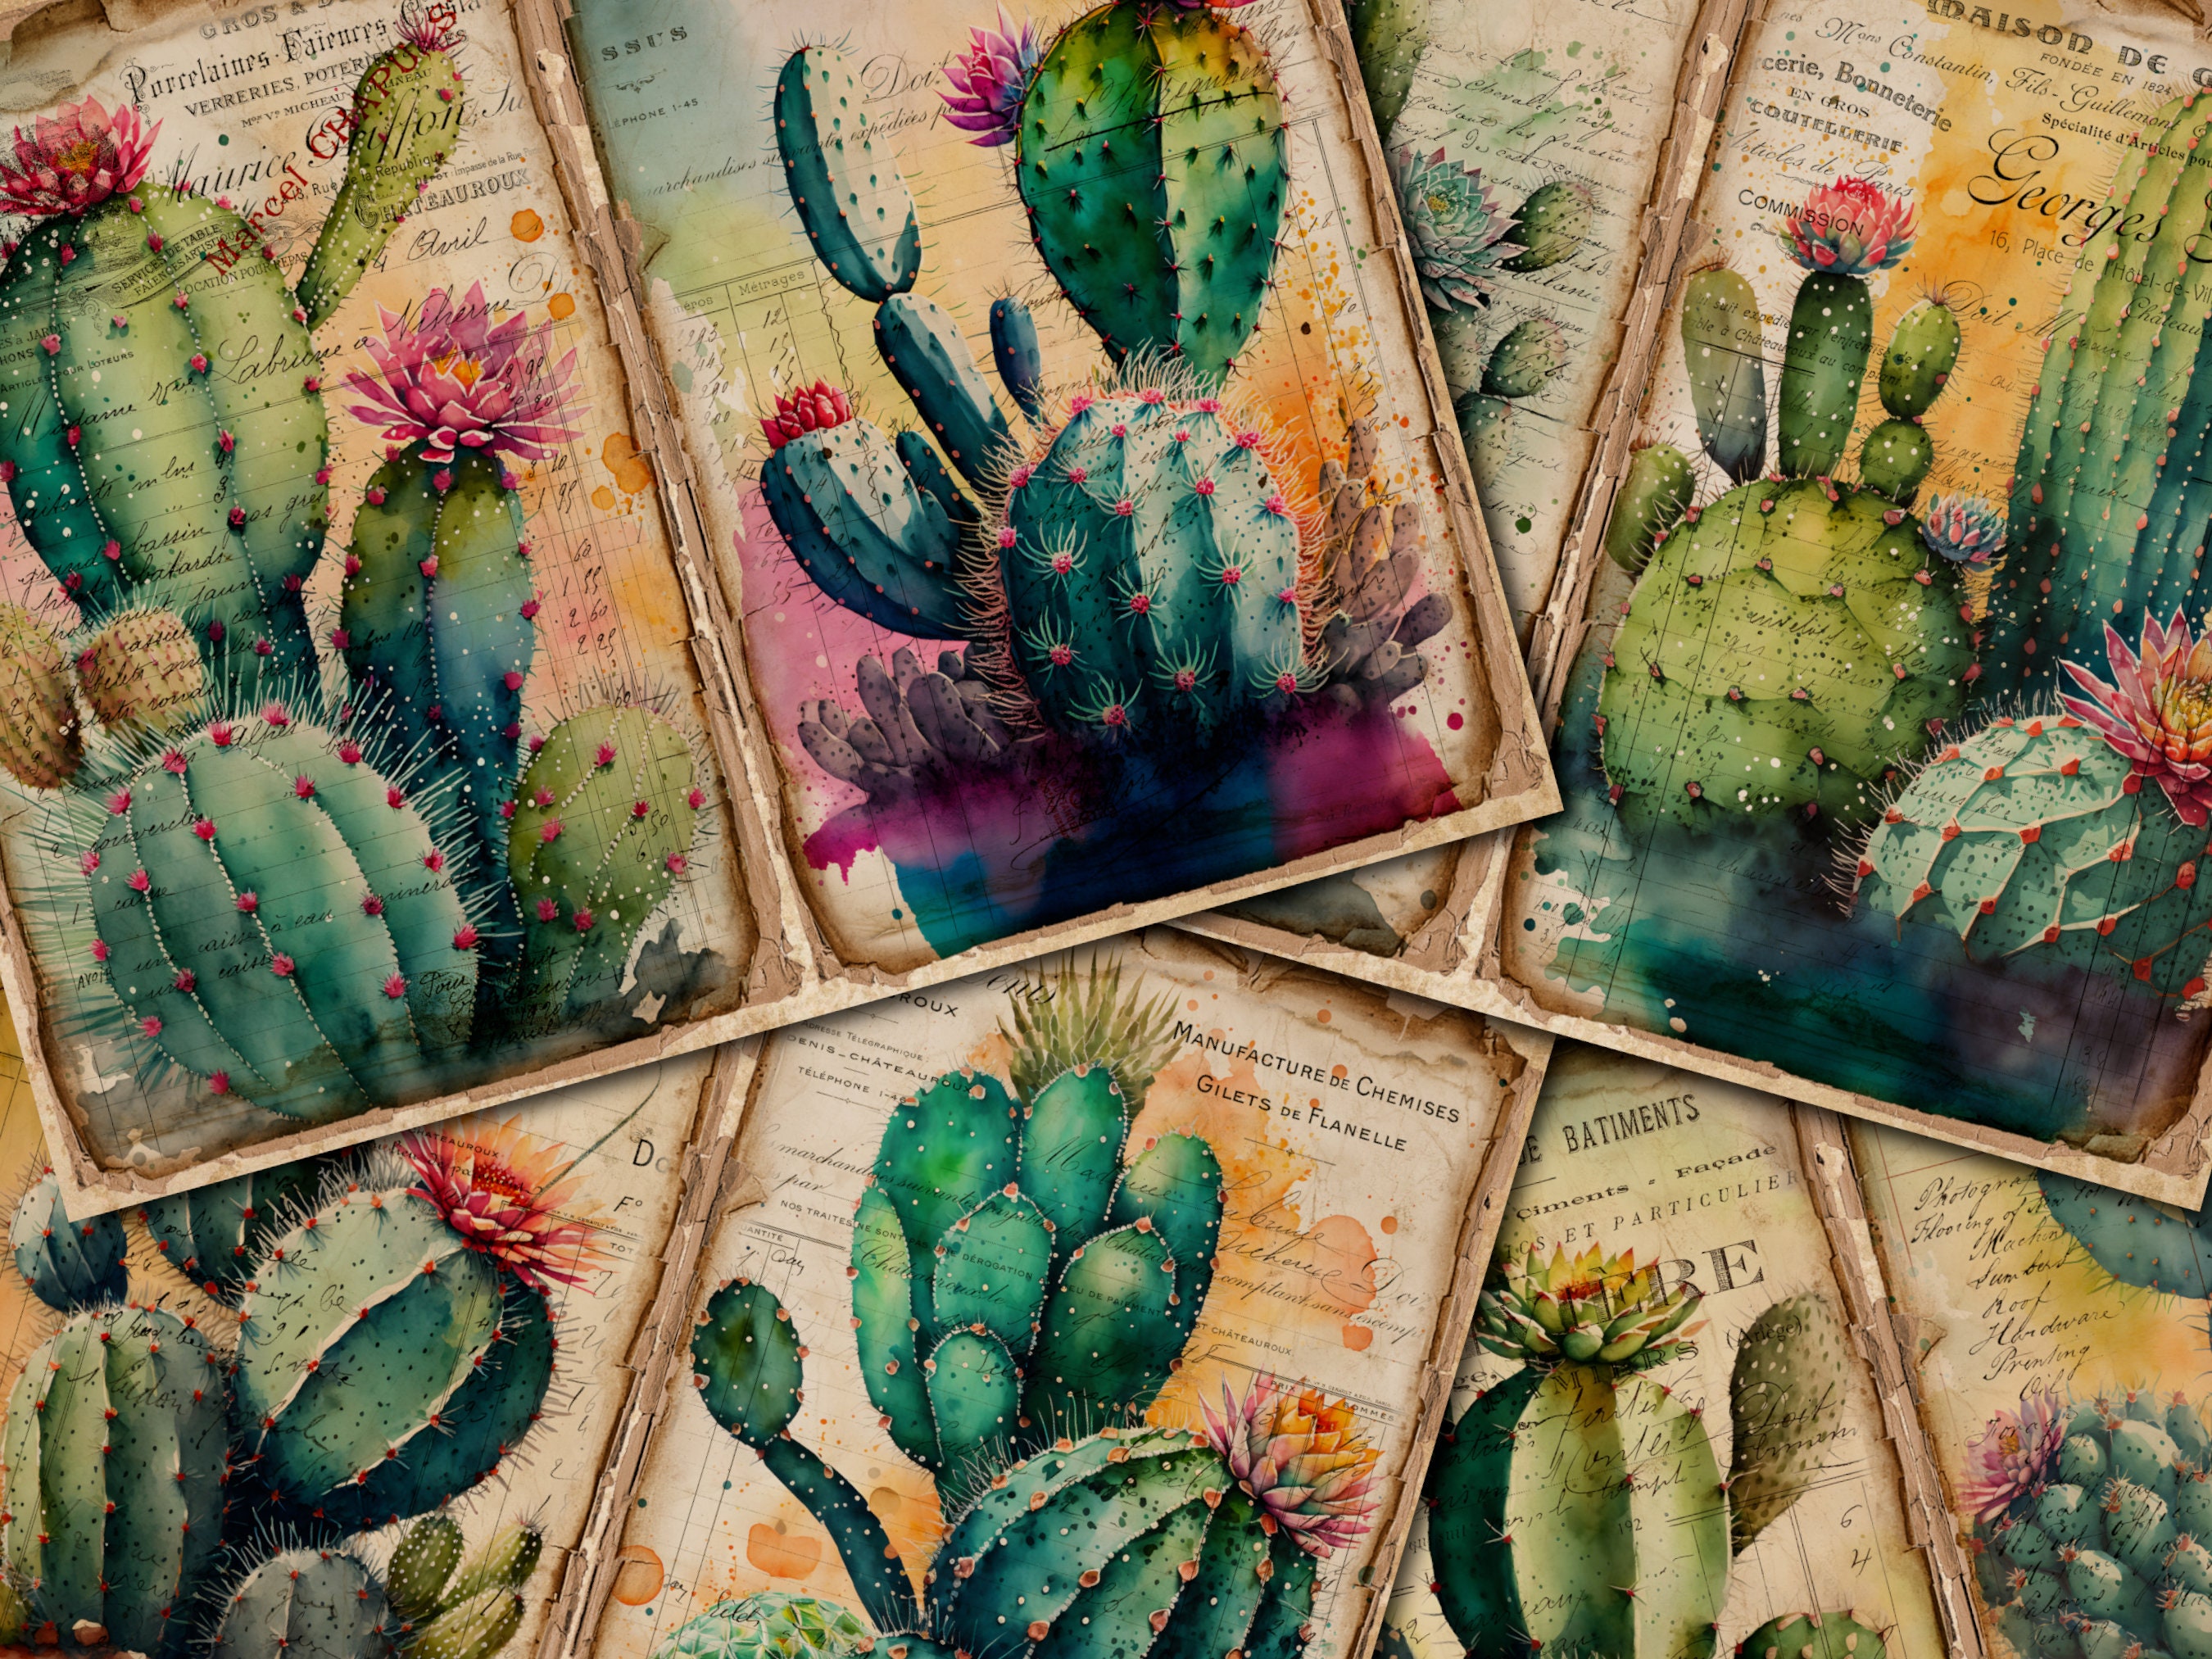 Stone Linen Gratitude Journal A5 Size – Prickly pear me